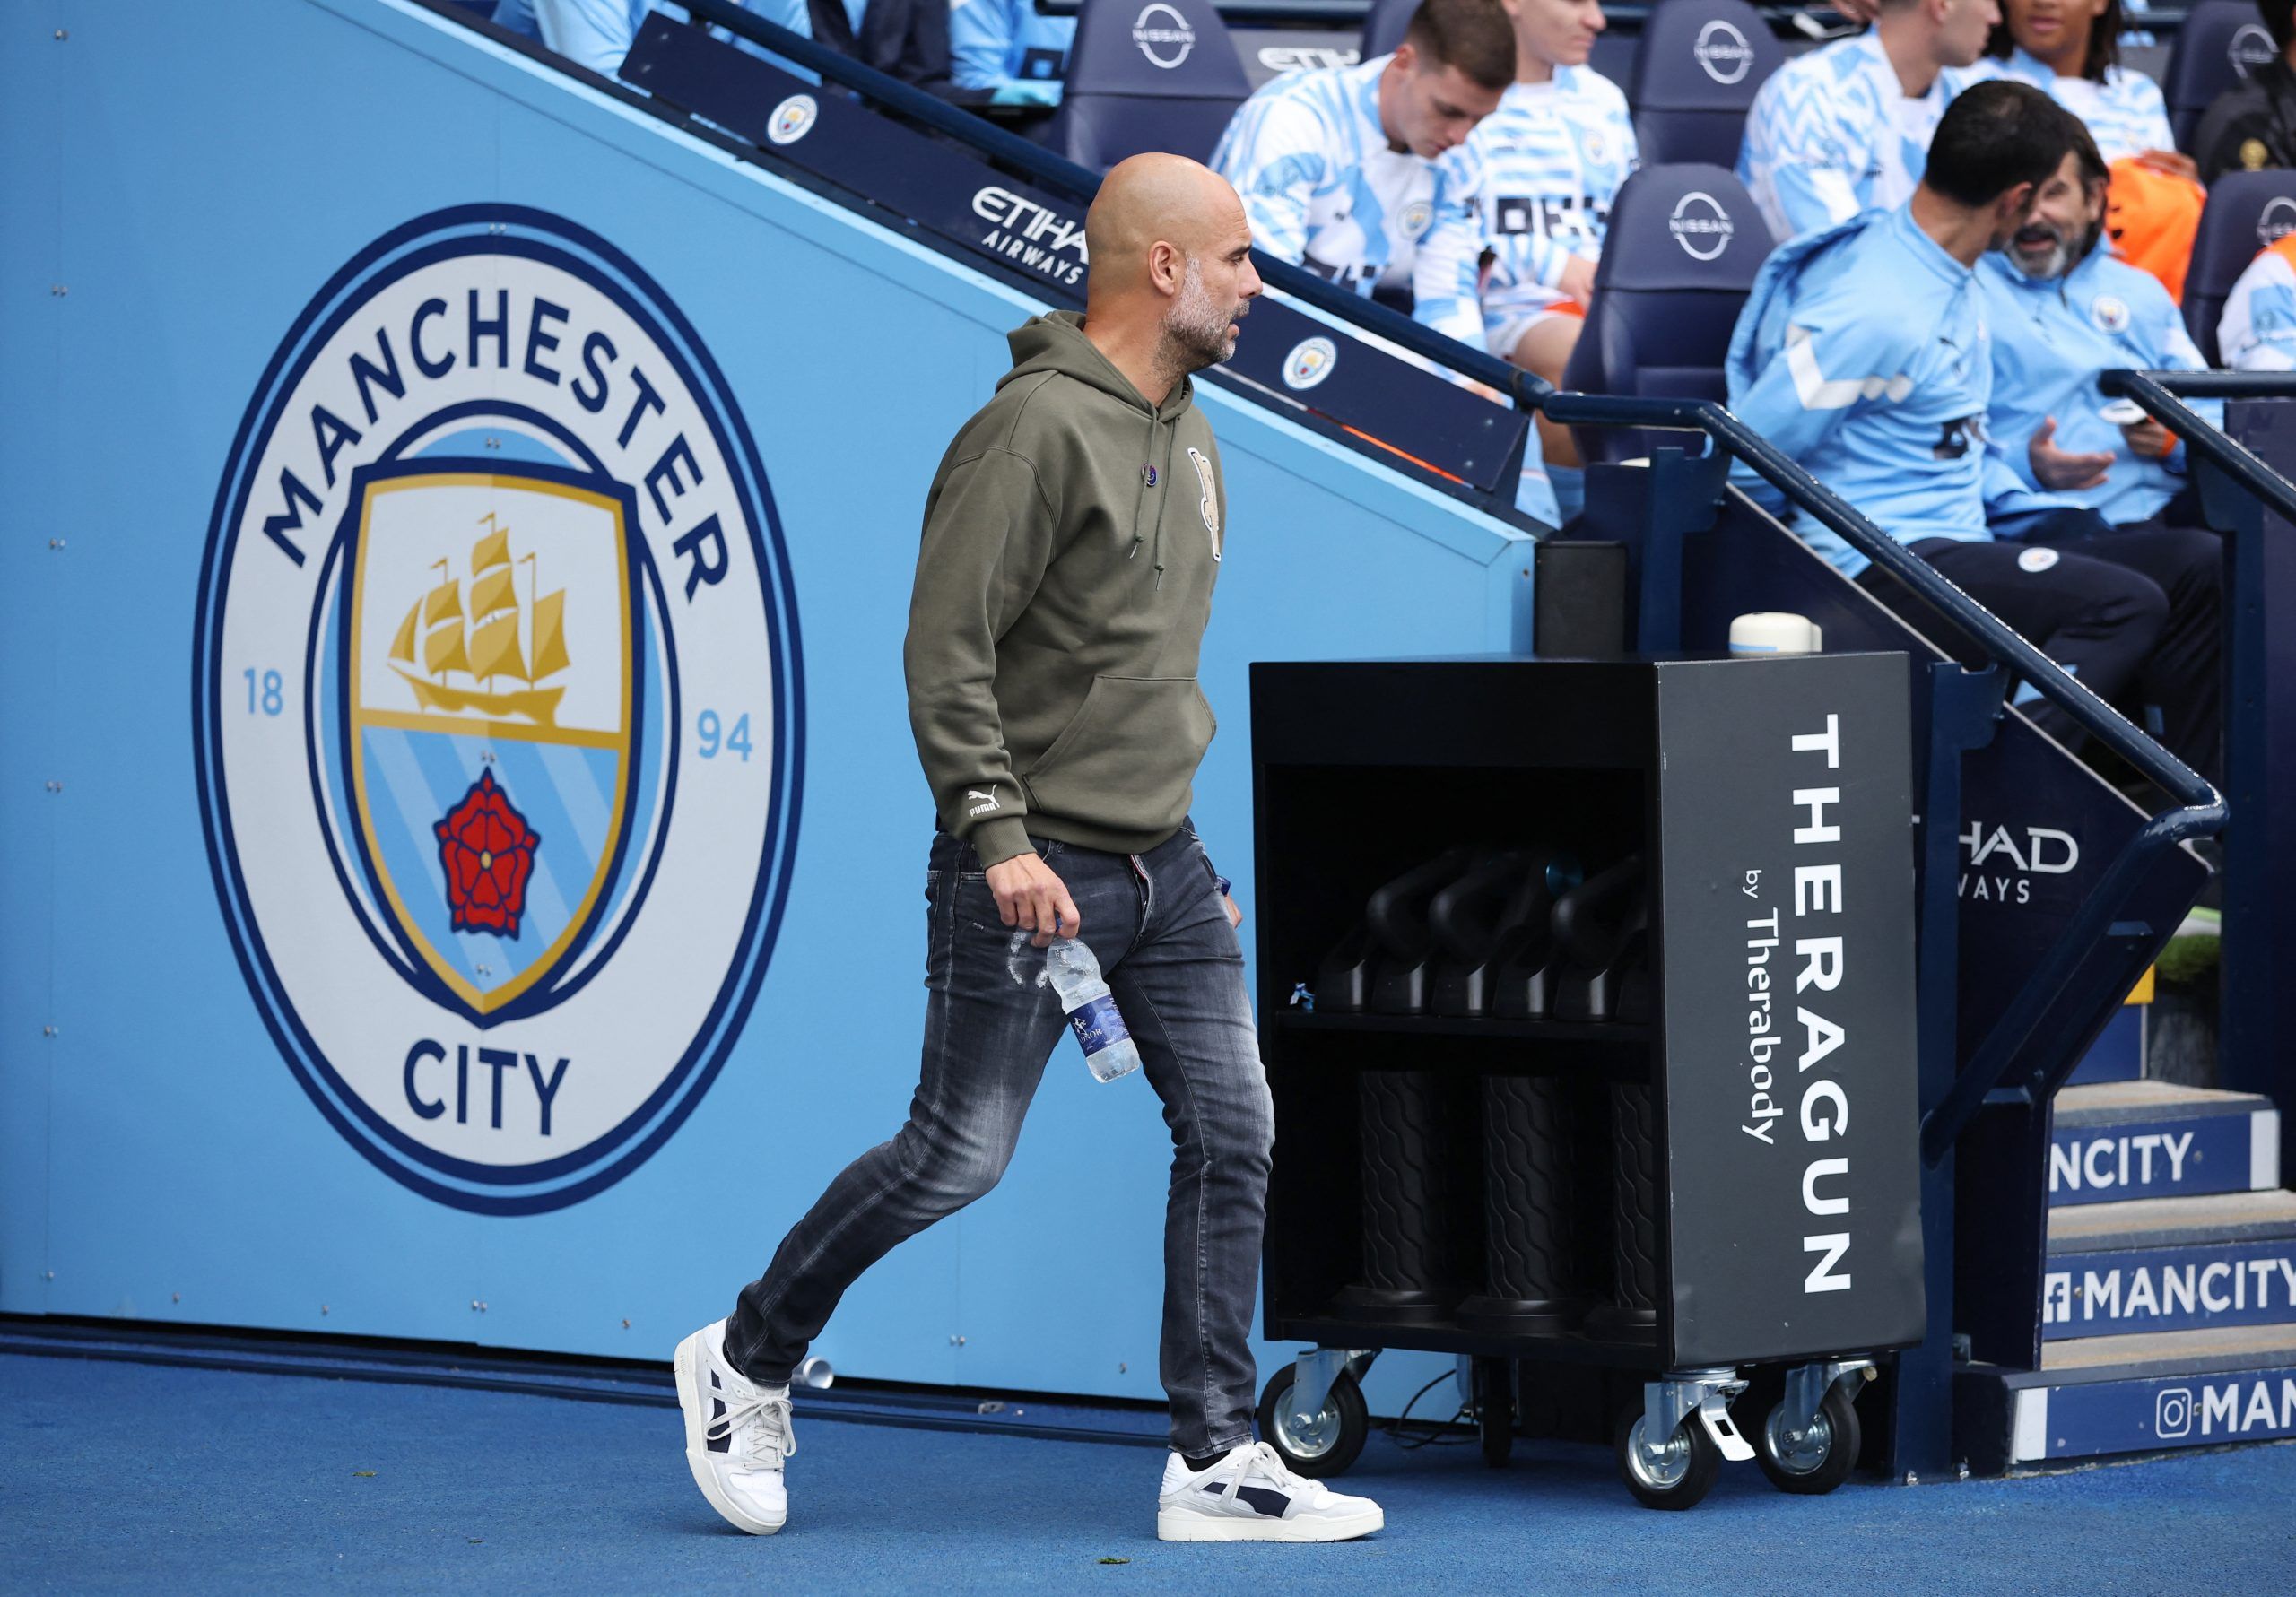 Manchester City World Cup quiz – can you get 100%? -Manchester City News